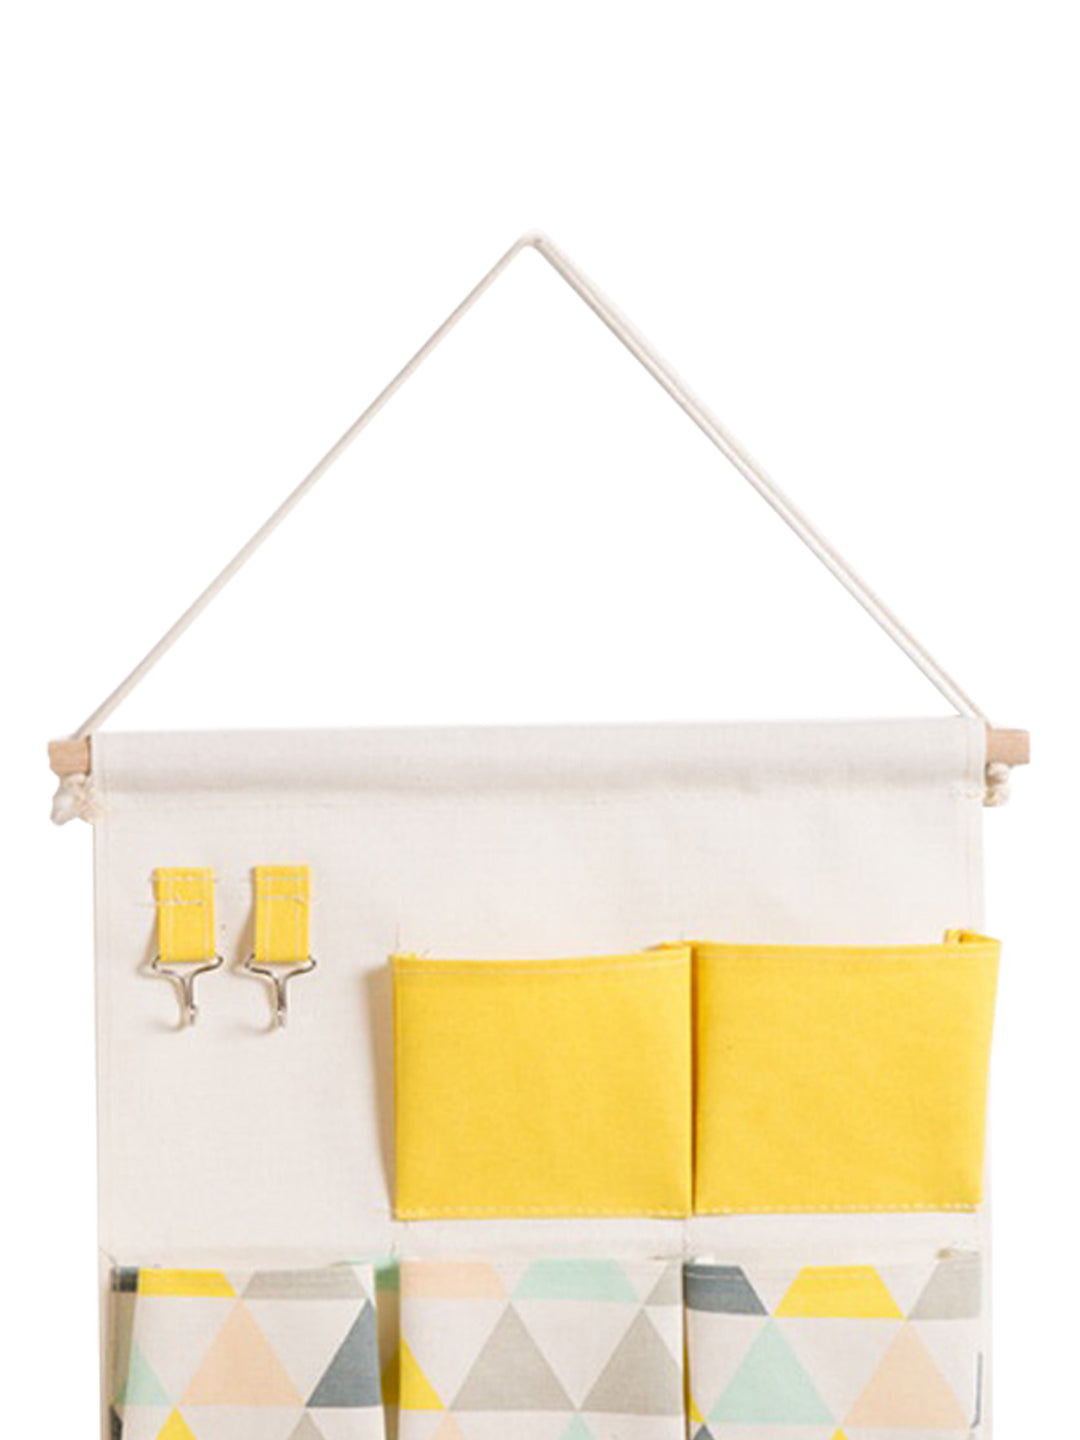 VON CASA Wall Hanging Storage Bag With 7 Pockets And Key Hook - Yellow